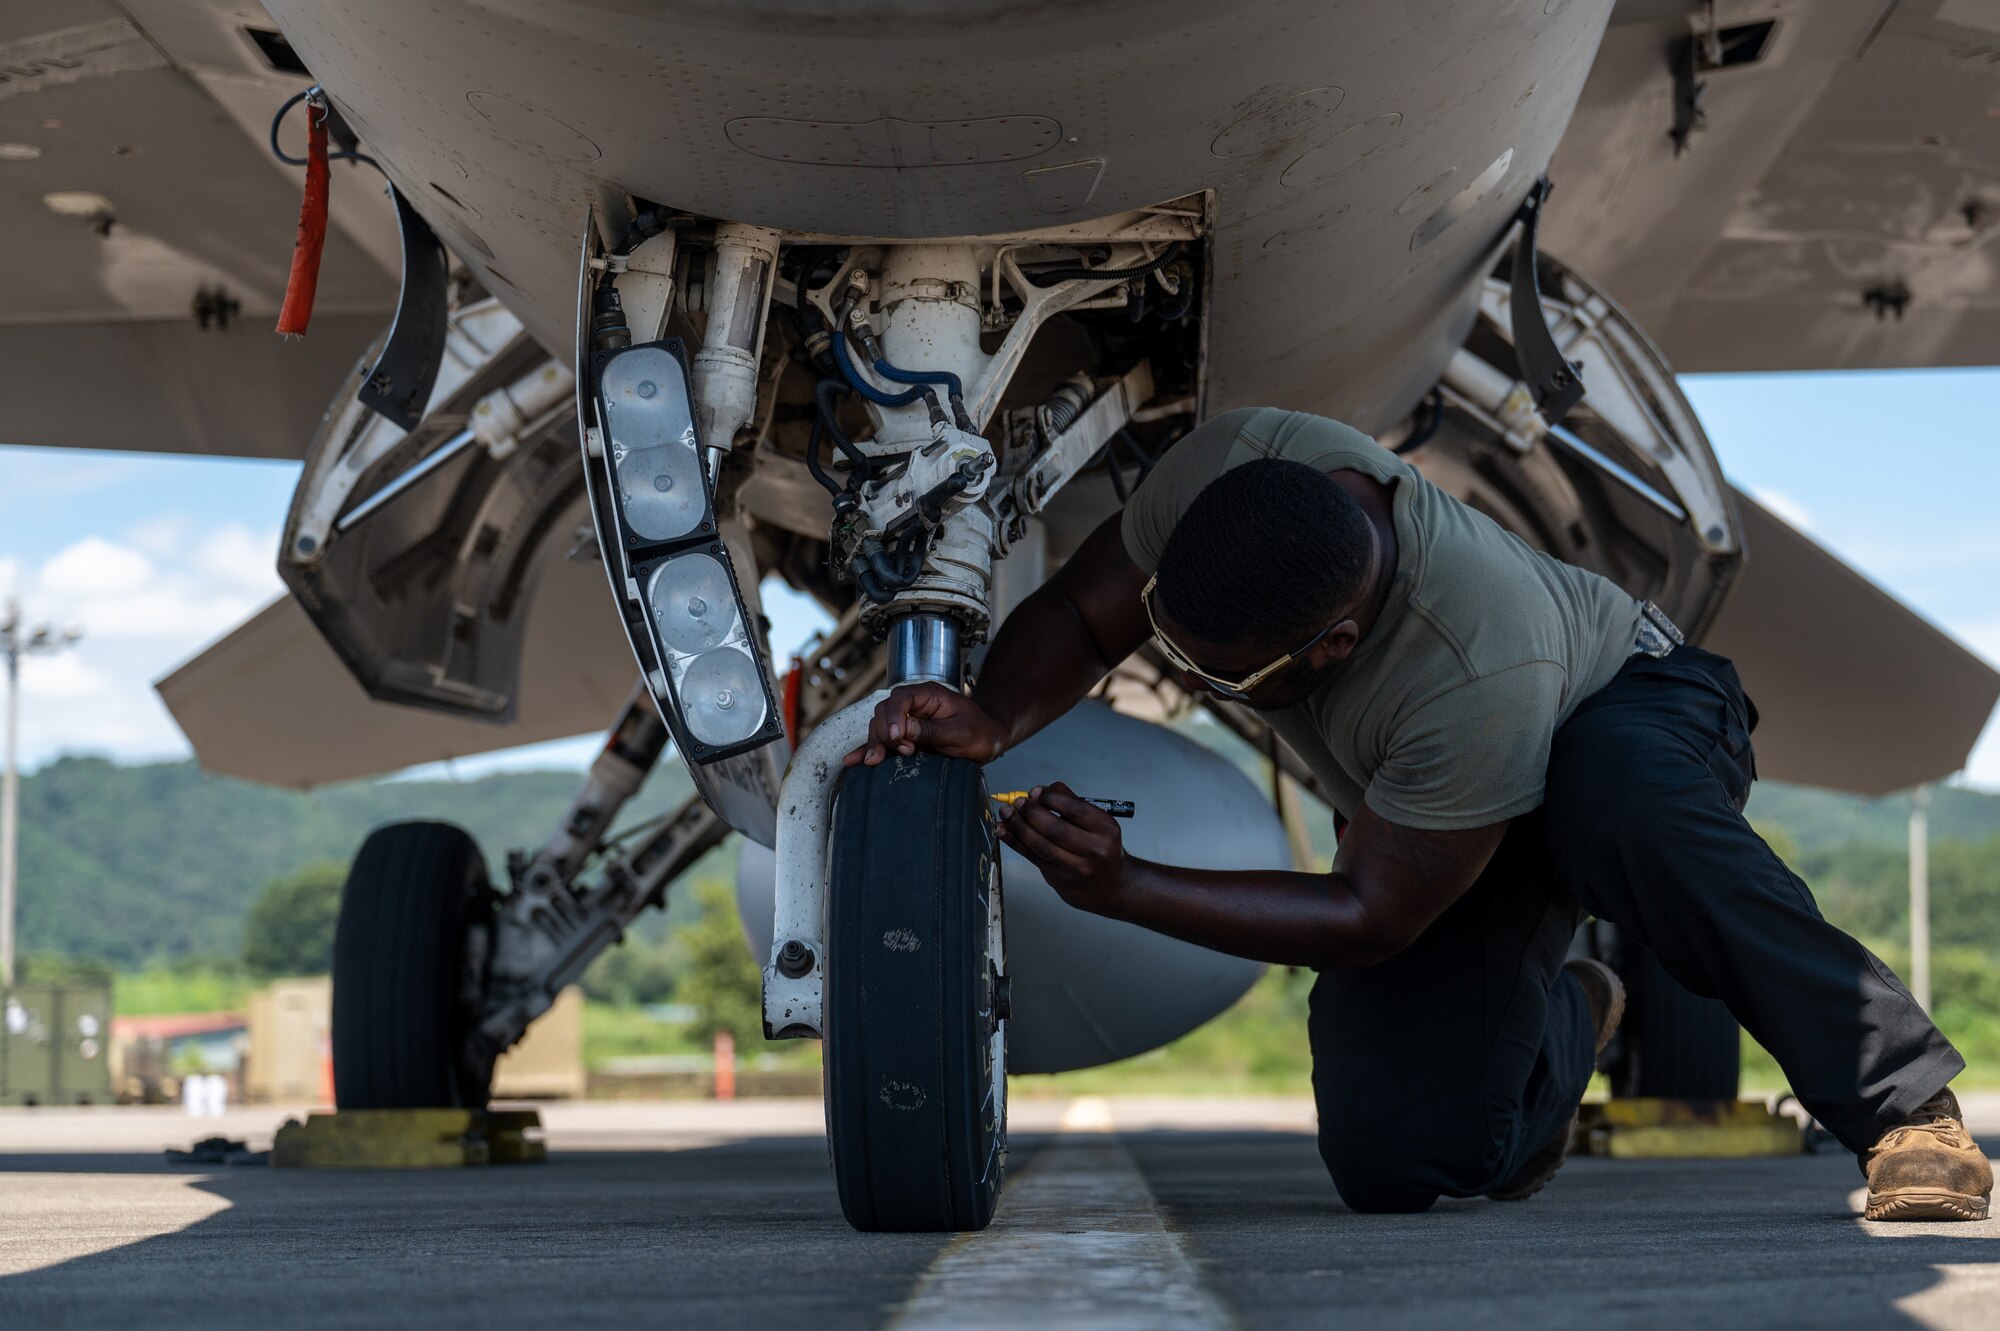 Staff Sgt. Charles Clark marks the tire of a U.S. Air Force F-16 Fighting Falcon during a U.S.-Republic of Korea Buddy Squadron event.